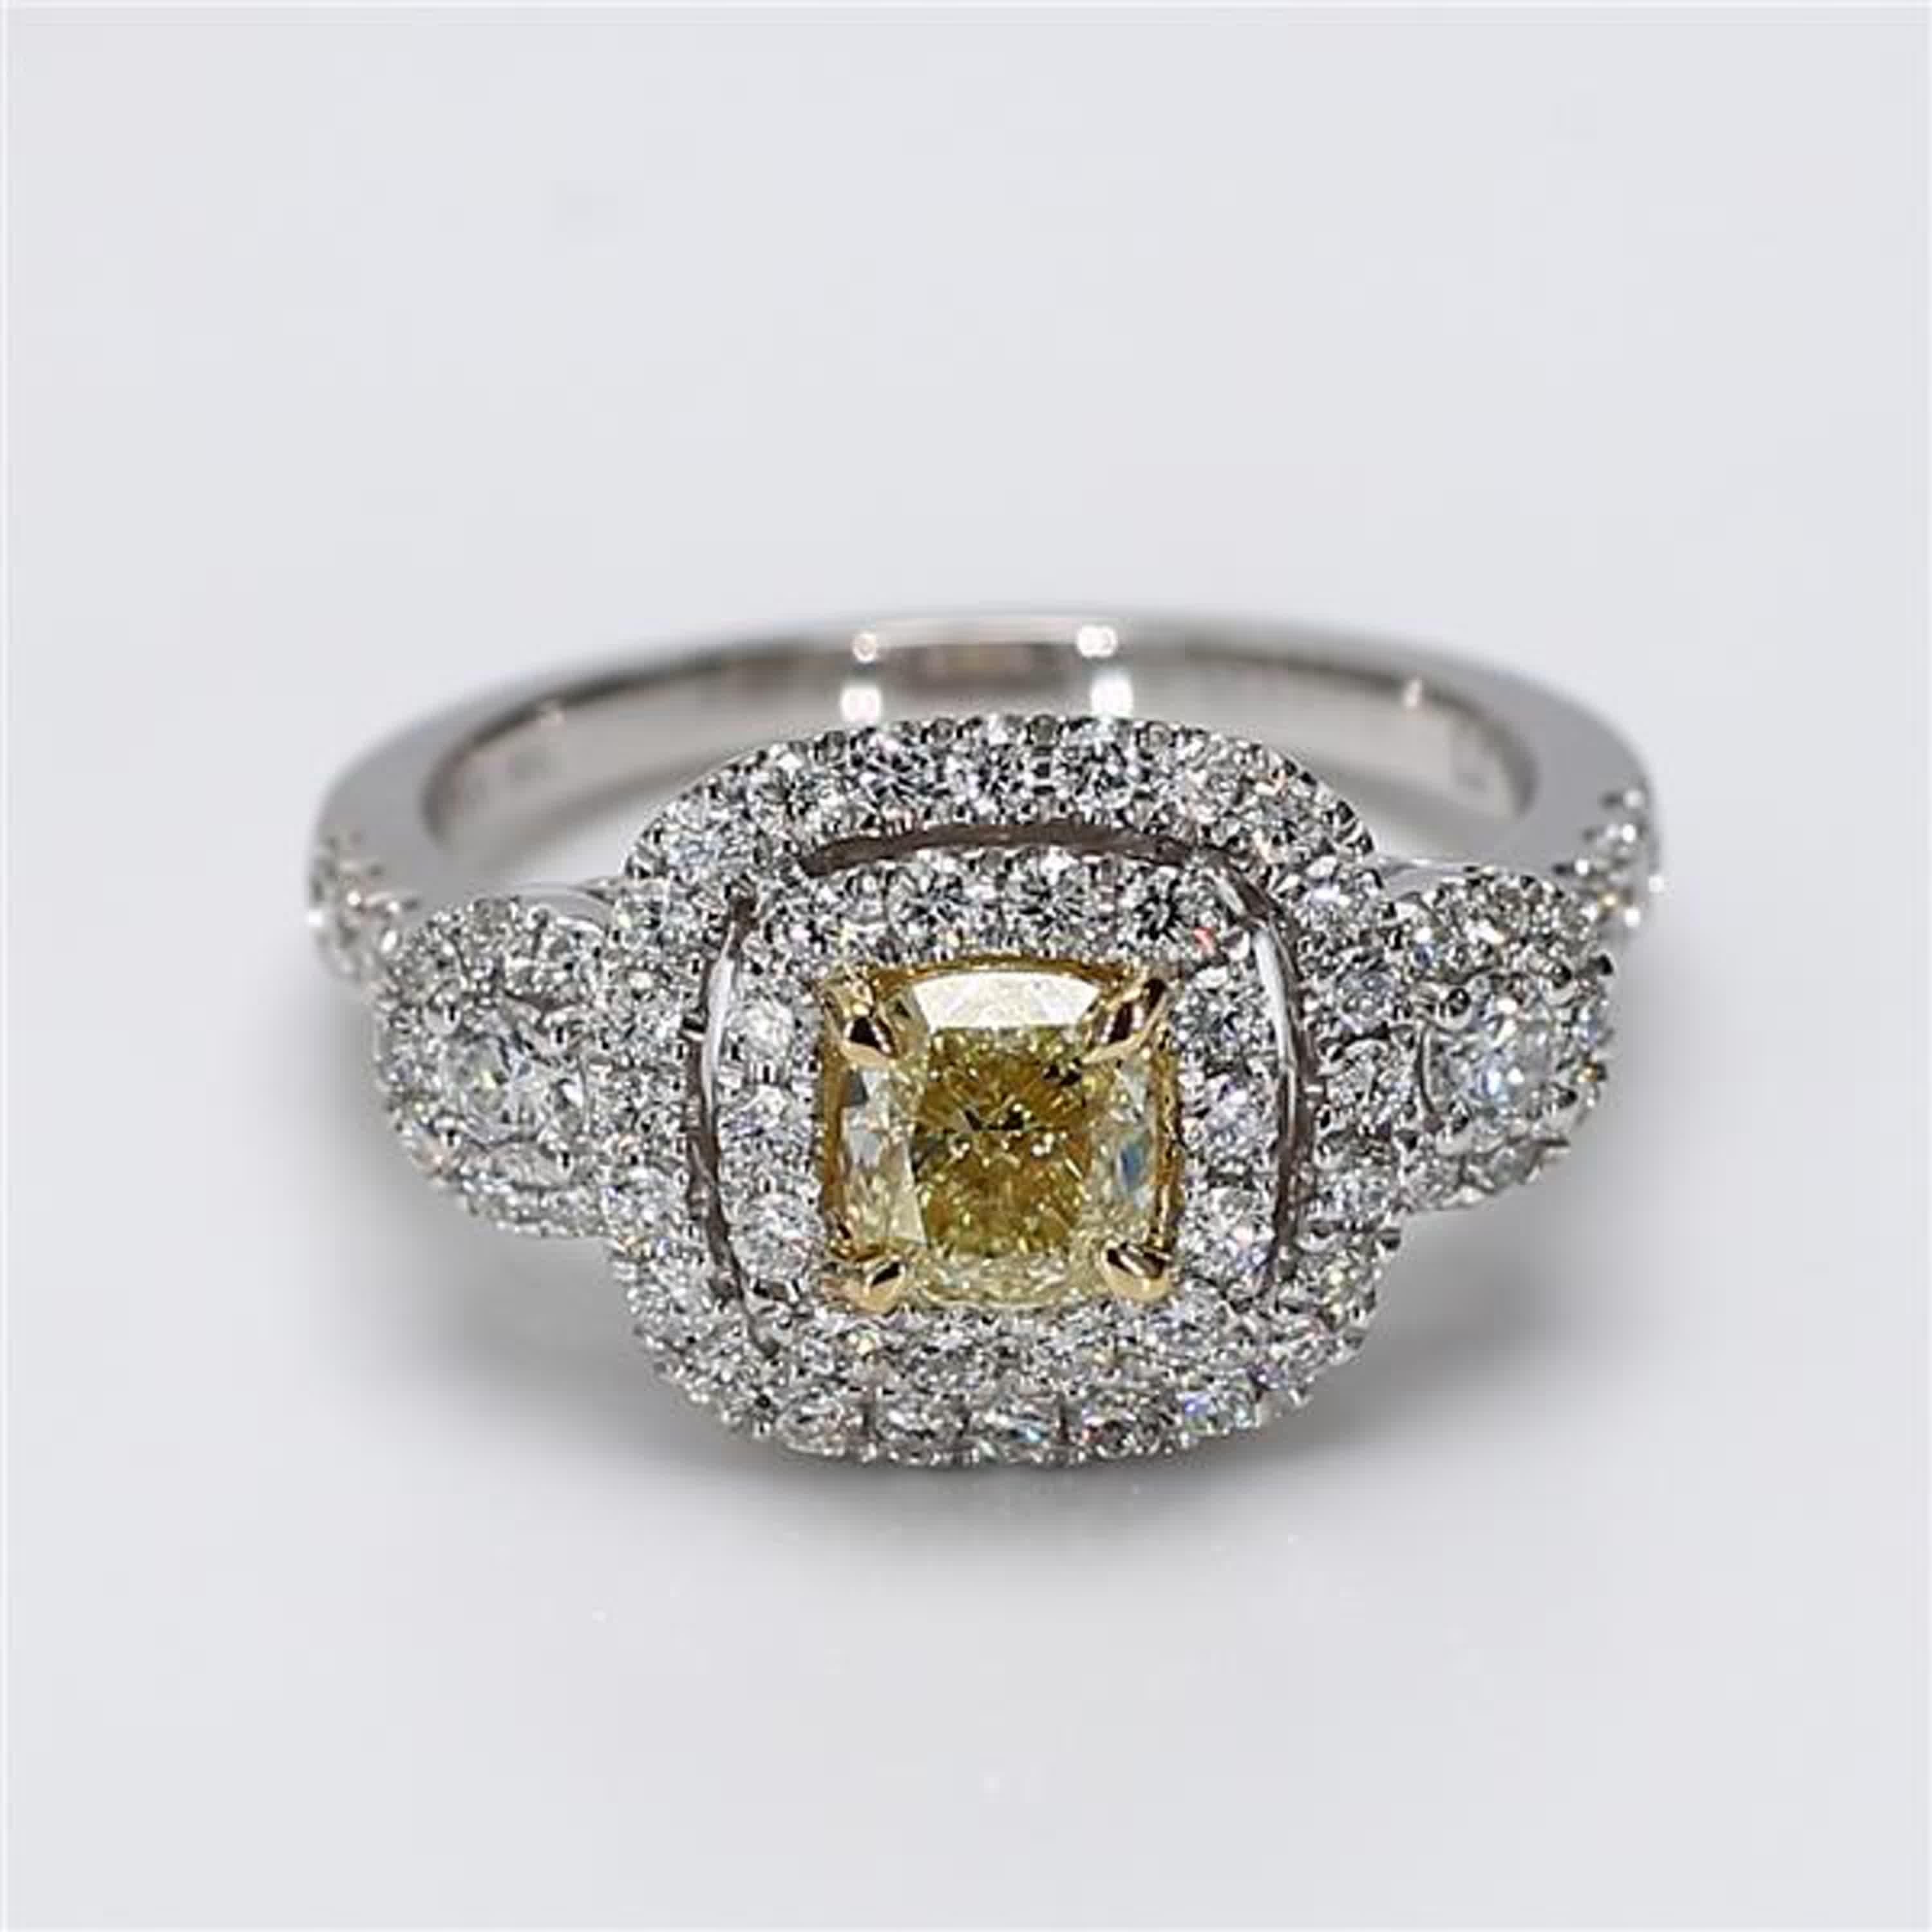 RareGemWorld's classic diamond ring. Mounted in a beautiful Platinum/18K Yellow and White Gold setting with a natural cushion cut yellow diamond. The yellow diamond is surrounded by round natural white diamond melee. This ring is guaranteed to